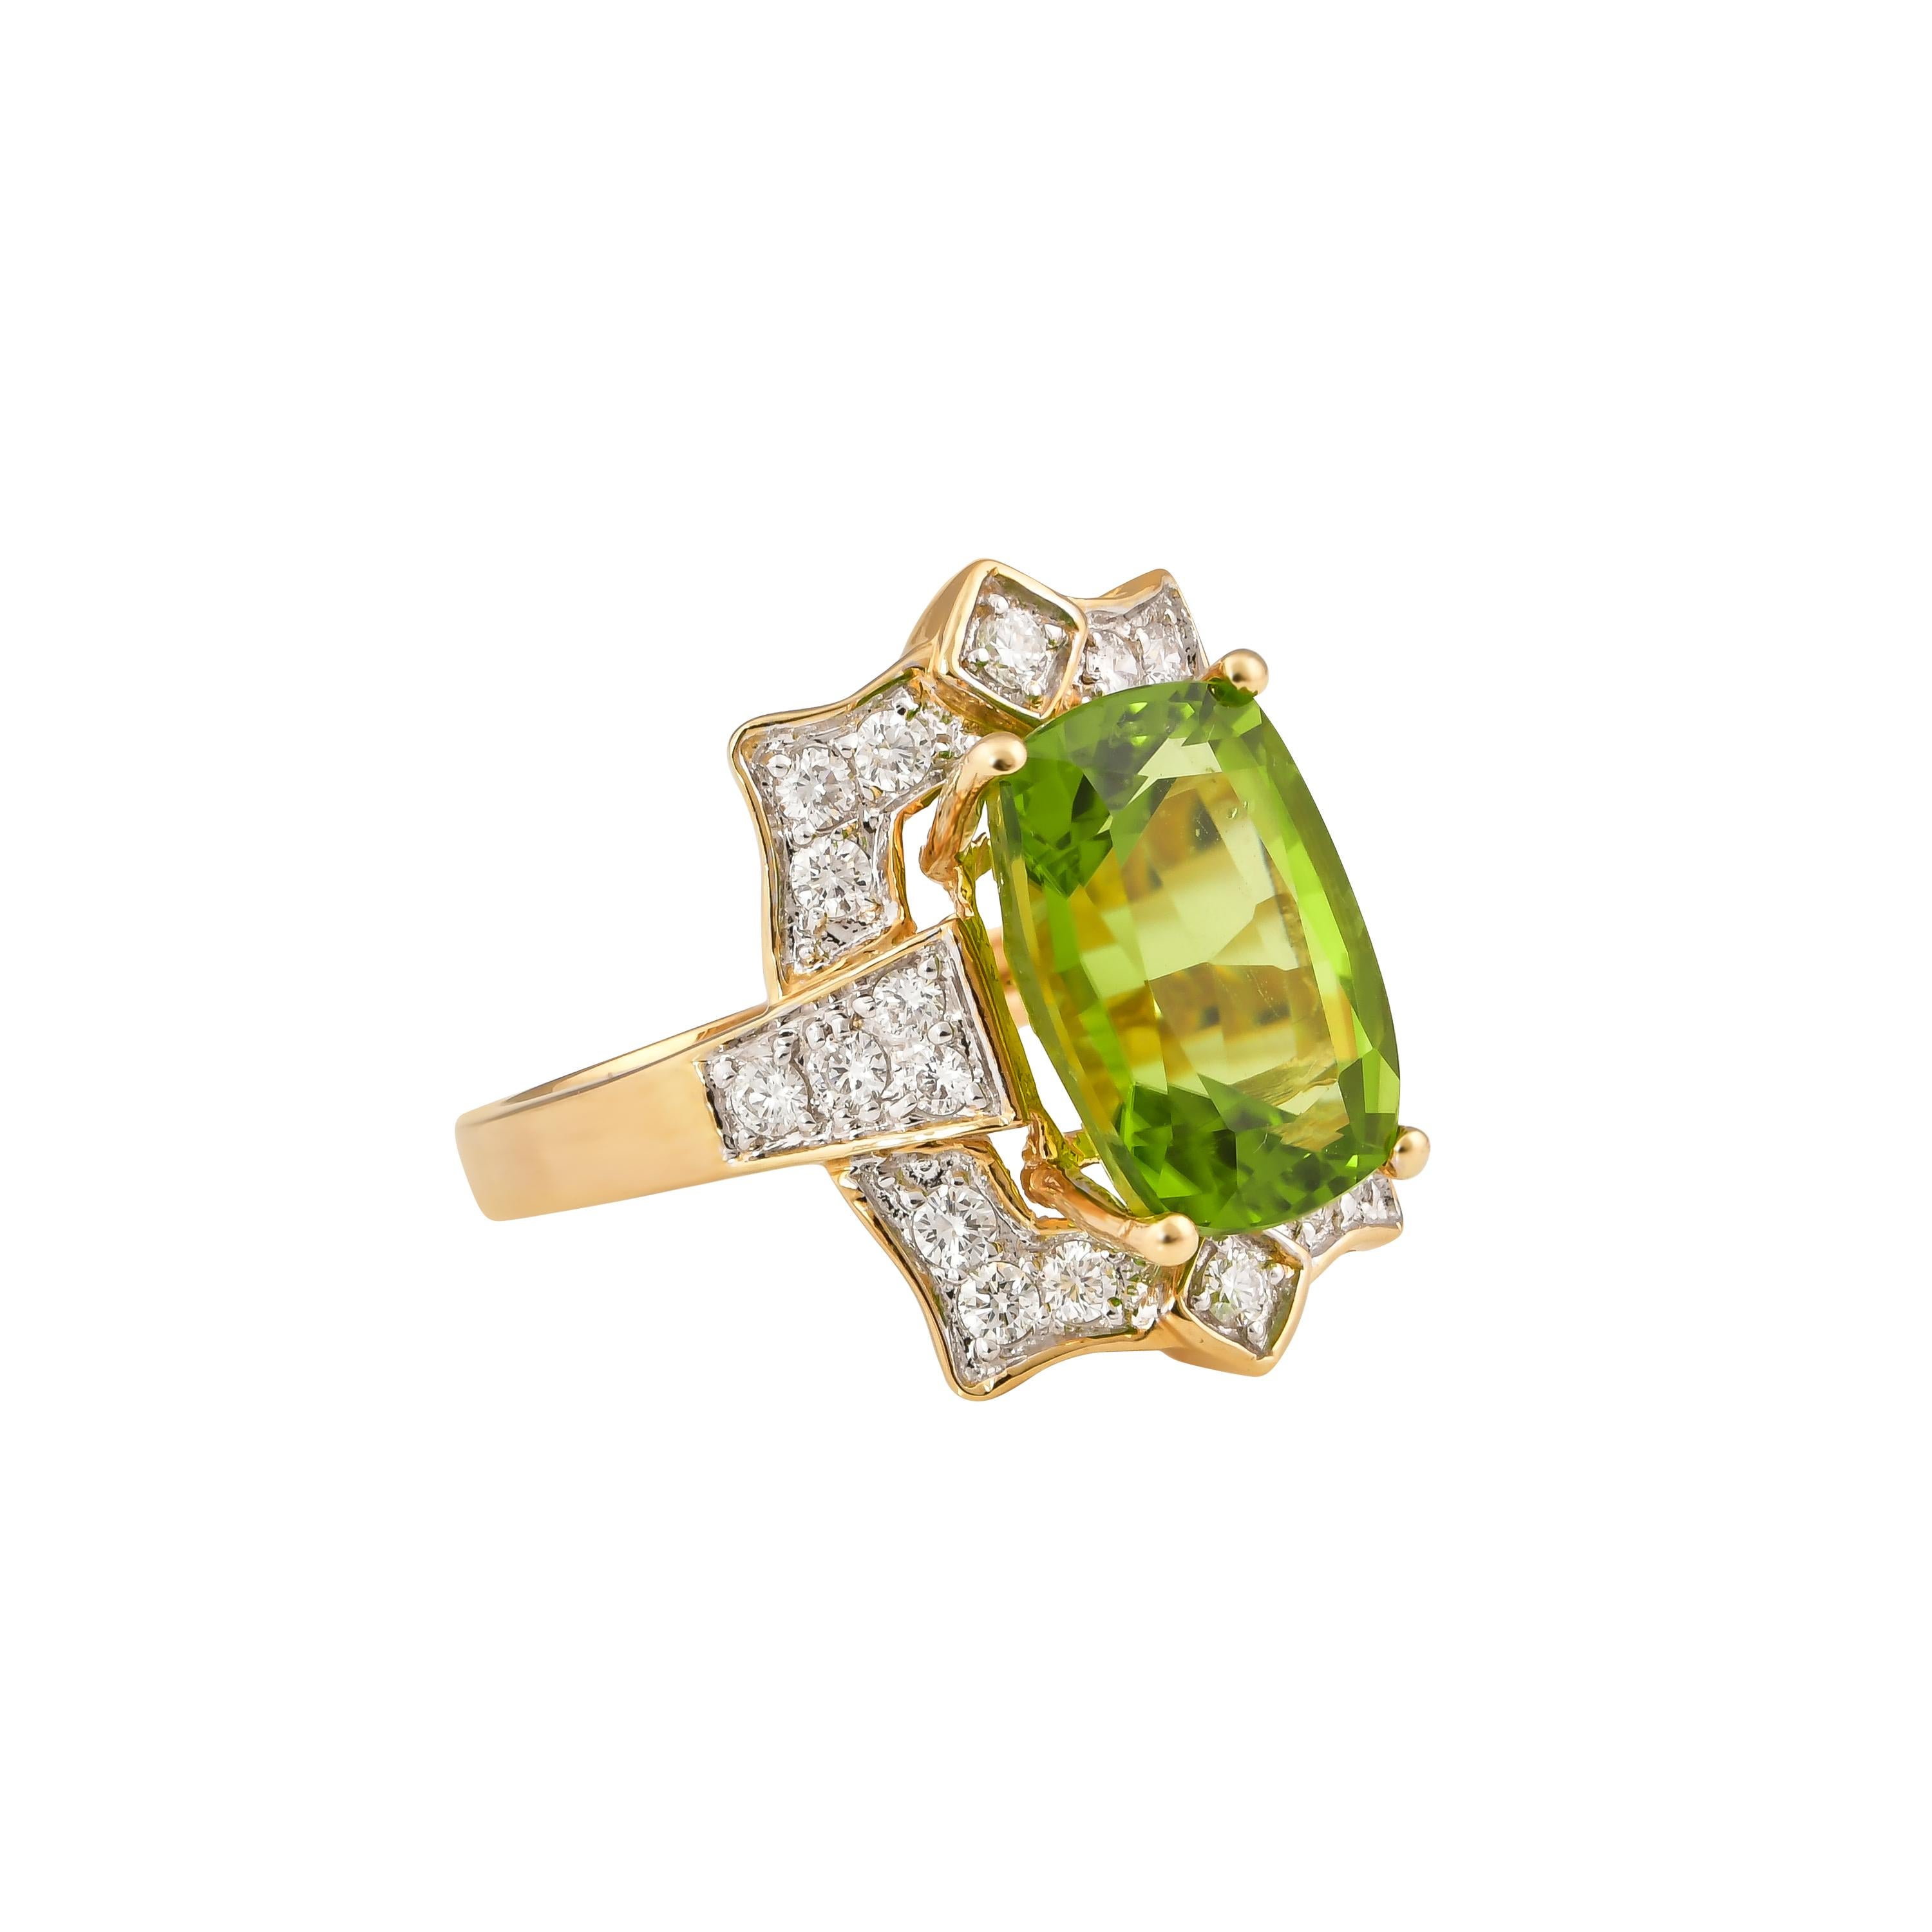 This collection features an array of pretty peridot rings! Accented with diamonds these rings are made in yellow gold and present a vibrant and fresh look. 

Classic peridot ring in 18K yellow gold with diamonds. 

Peridot: 7.01 carat cushion